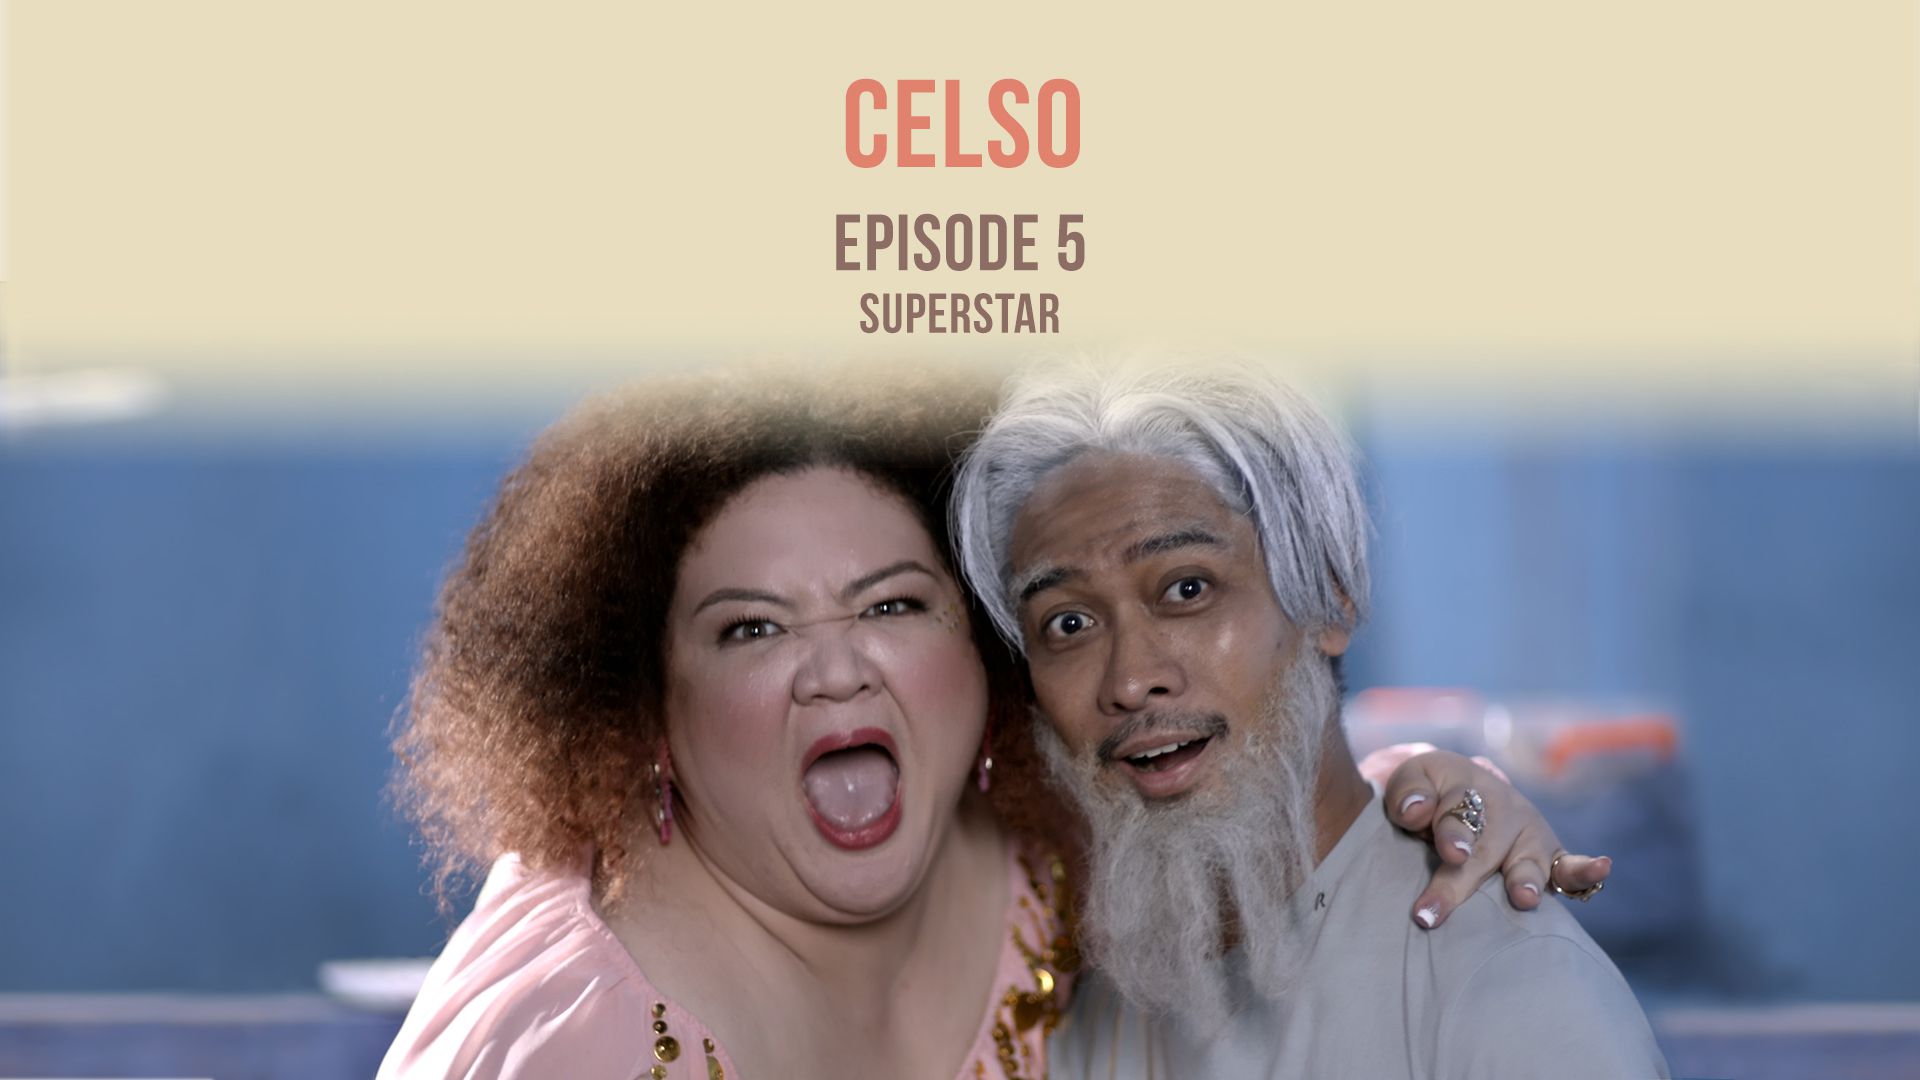 CELSO Episode 5